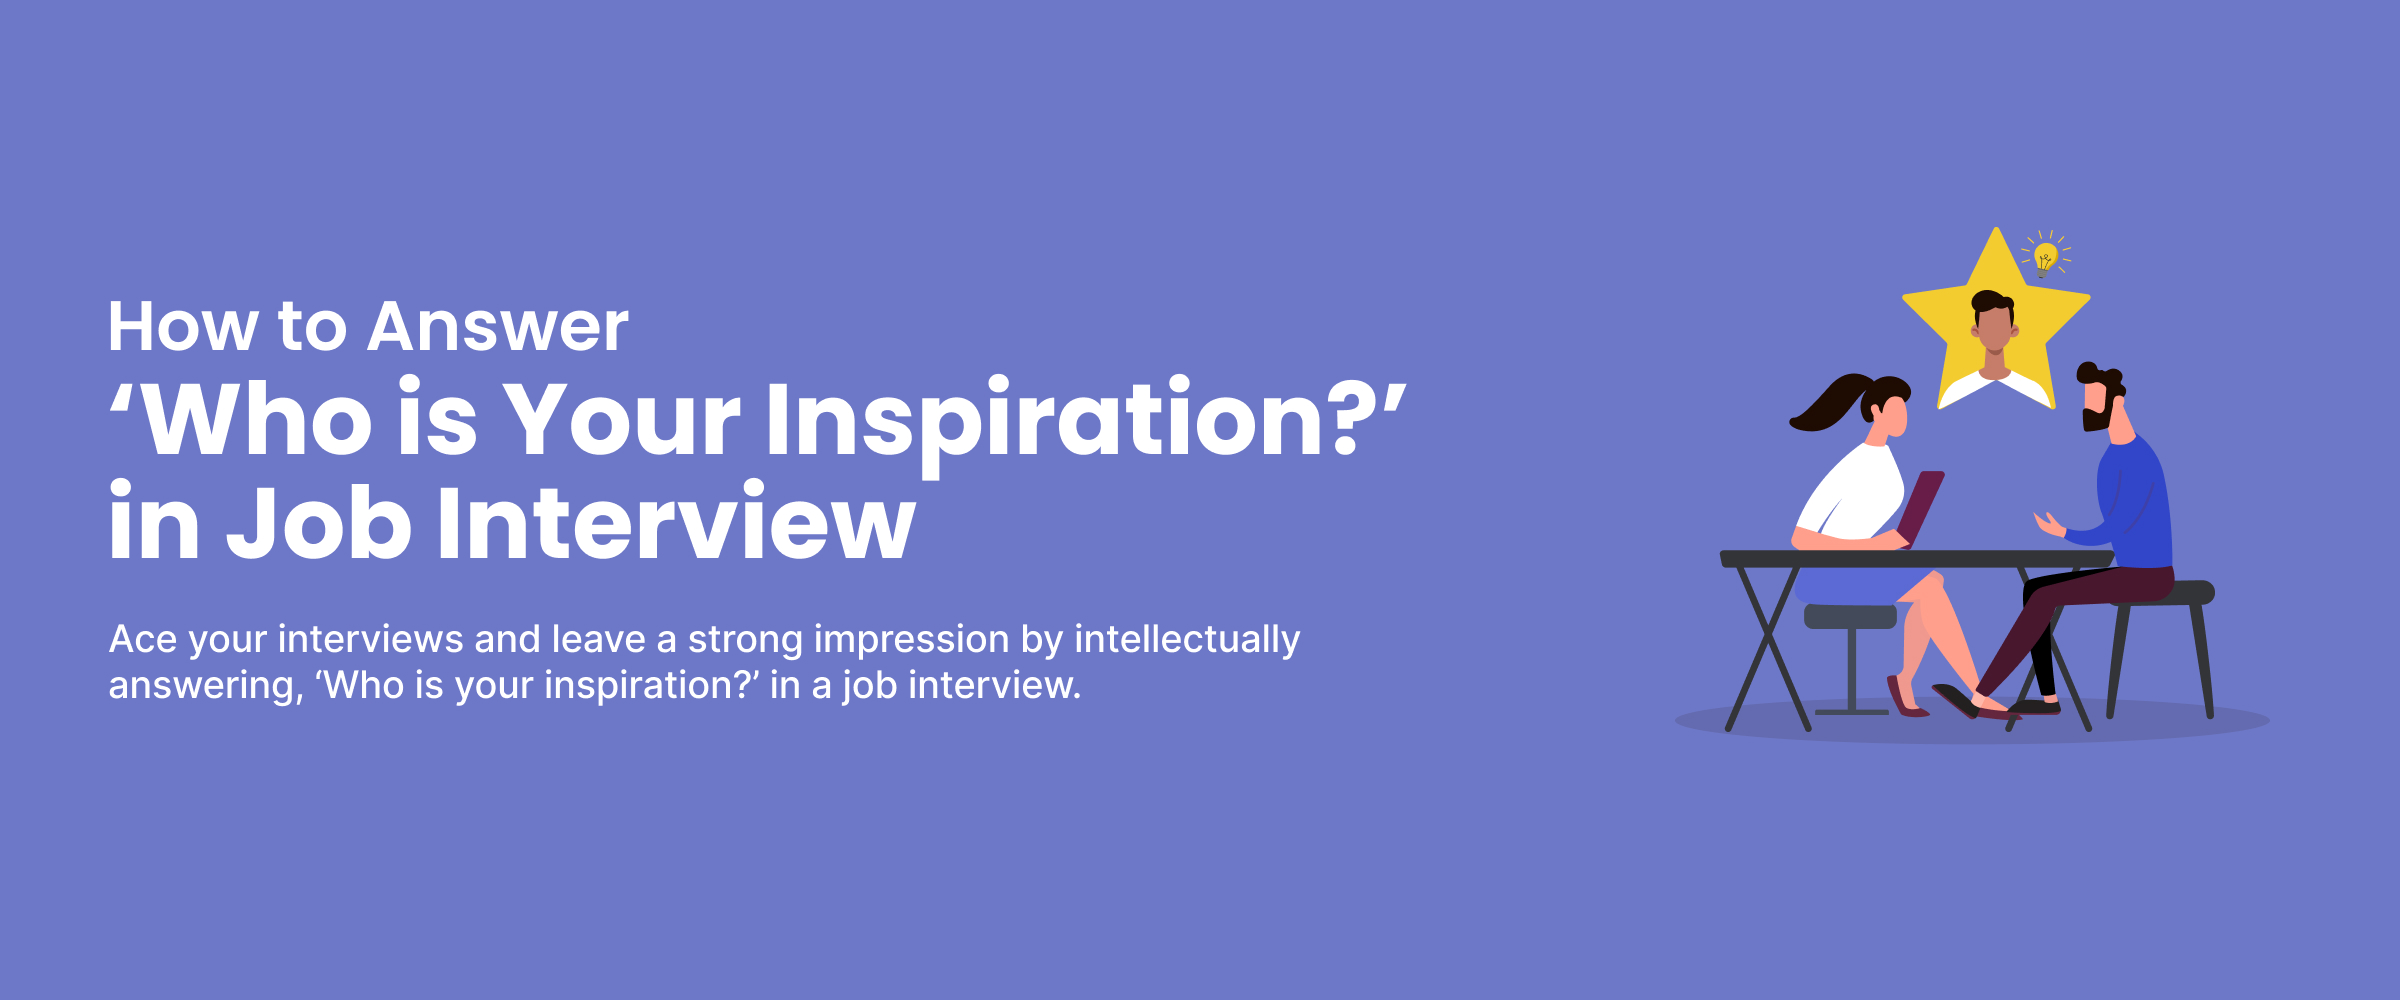 How to Answer ‘Who is Your Inspiration?’ in Job Interview